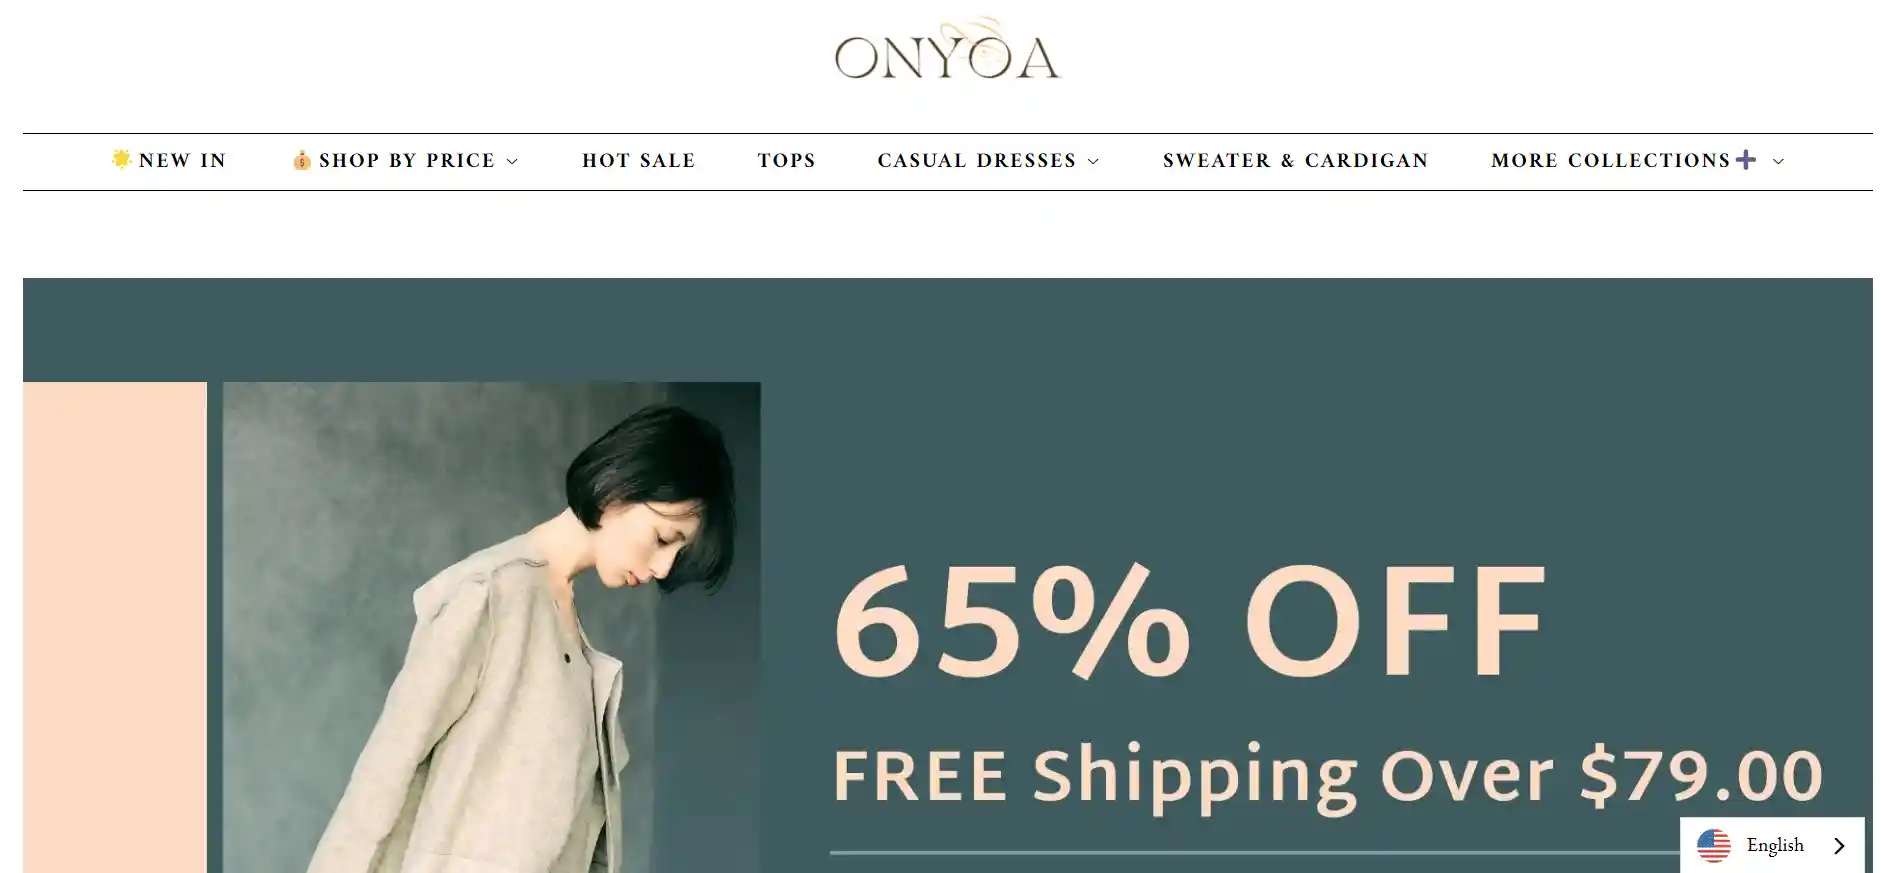 You are currently viewing Onyoa Clothing Reviews: Is It Legit Or Scam?